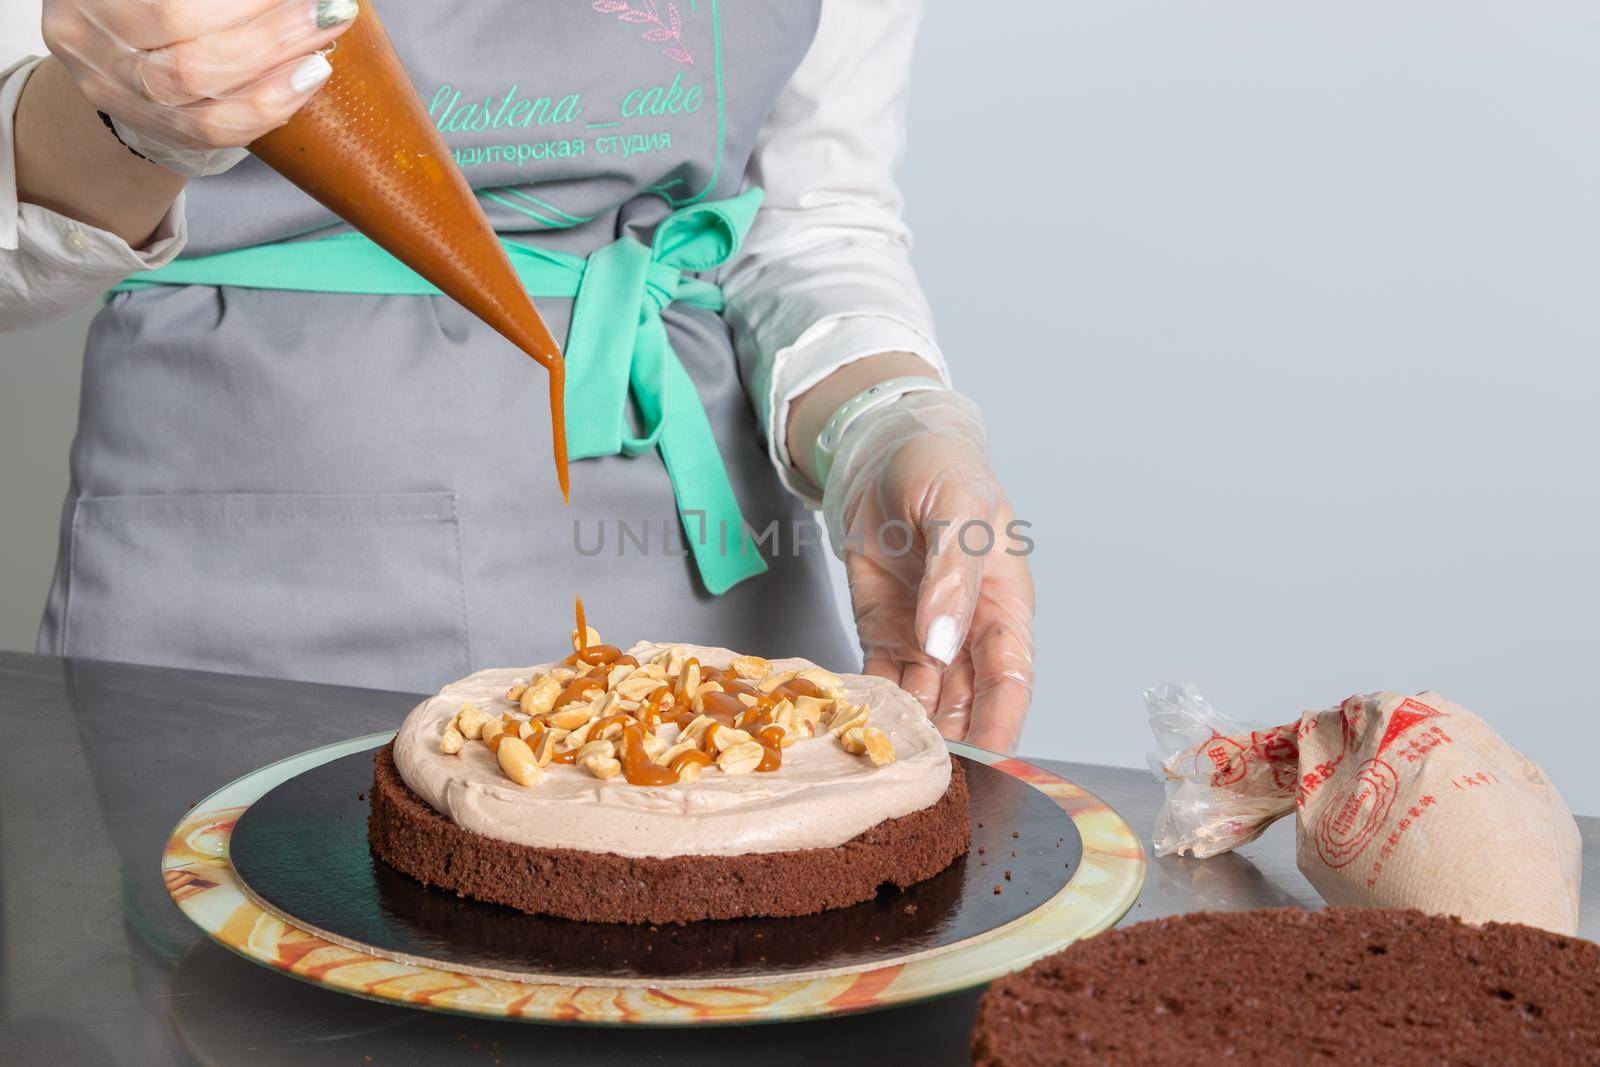 Moscow, Russia - April 18, 2021: Confectioner collects biscuit chocolate cake and decorates layers.